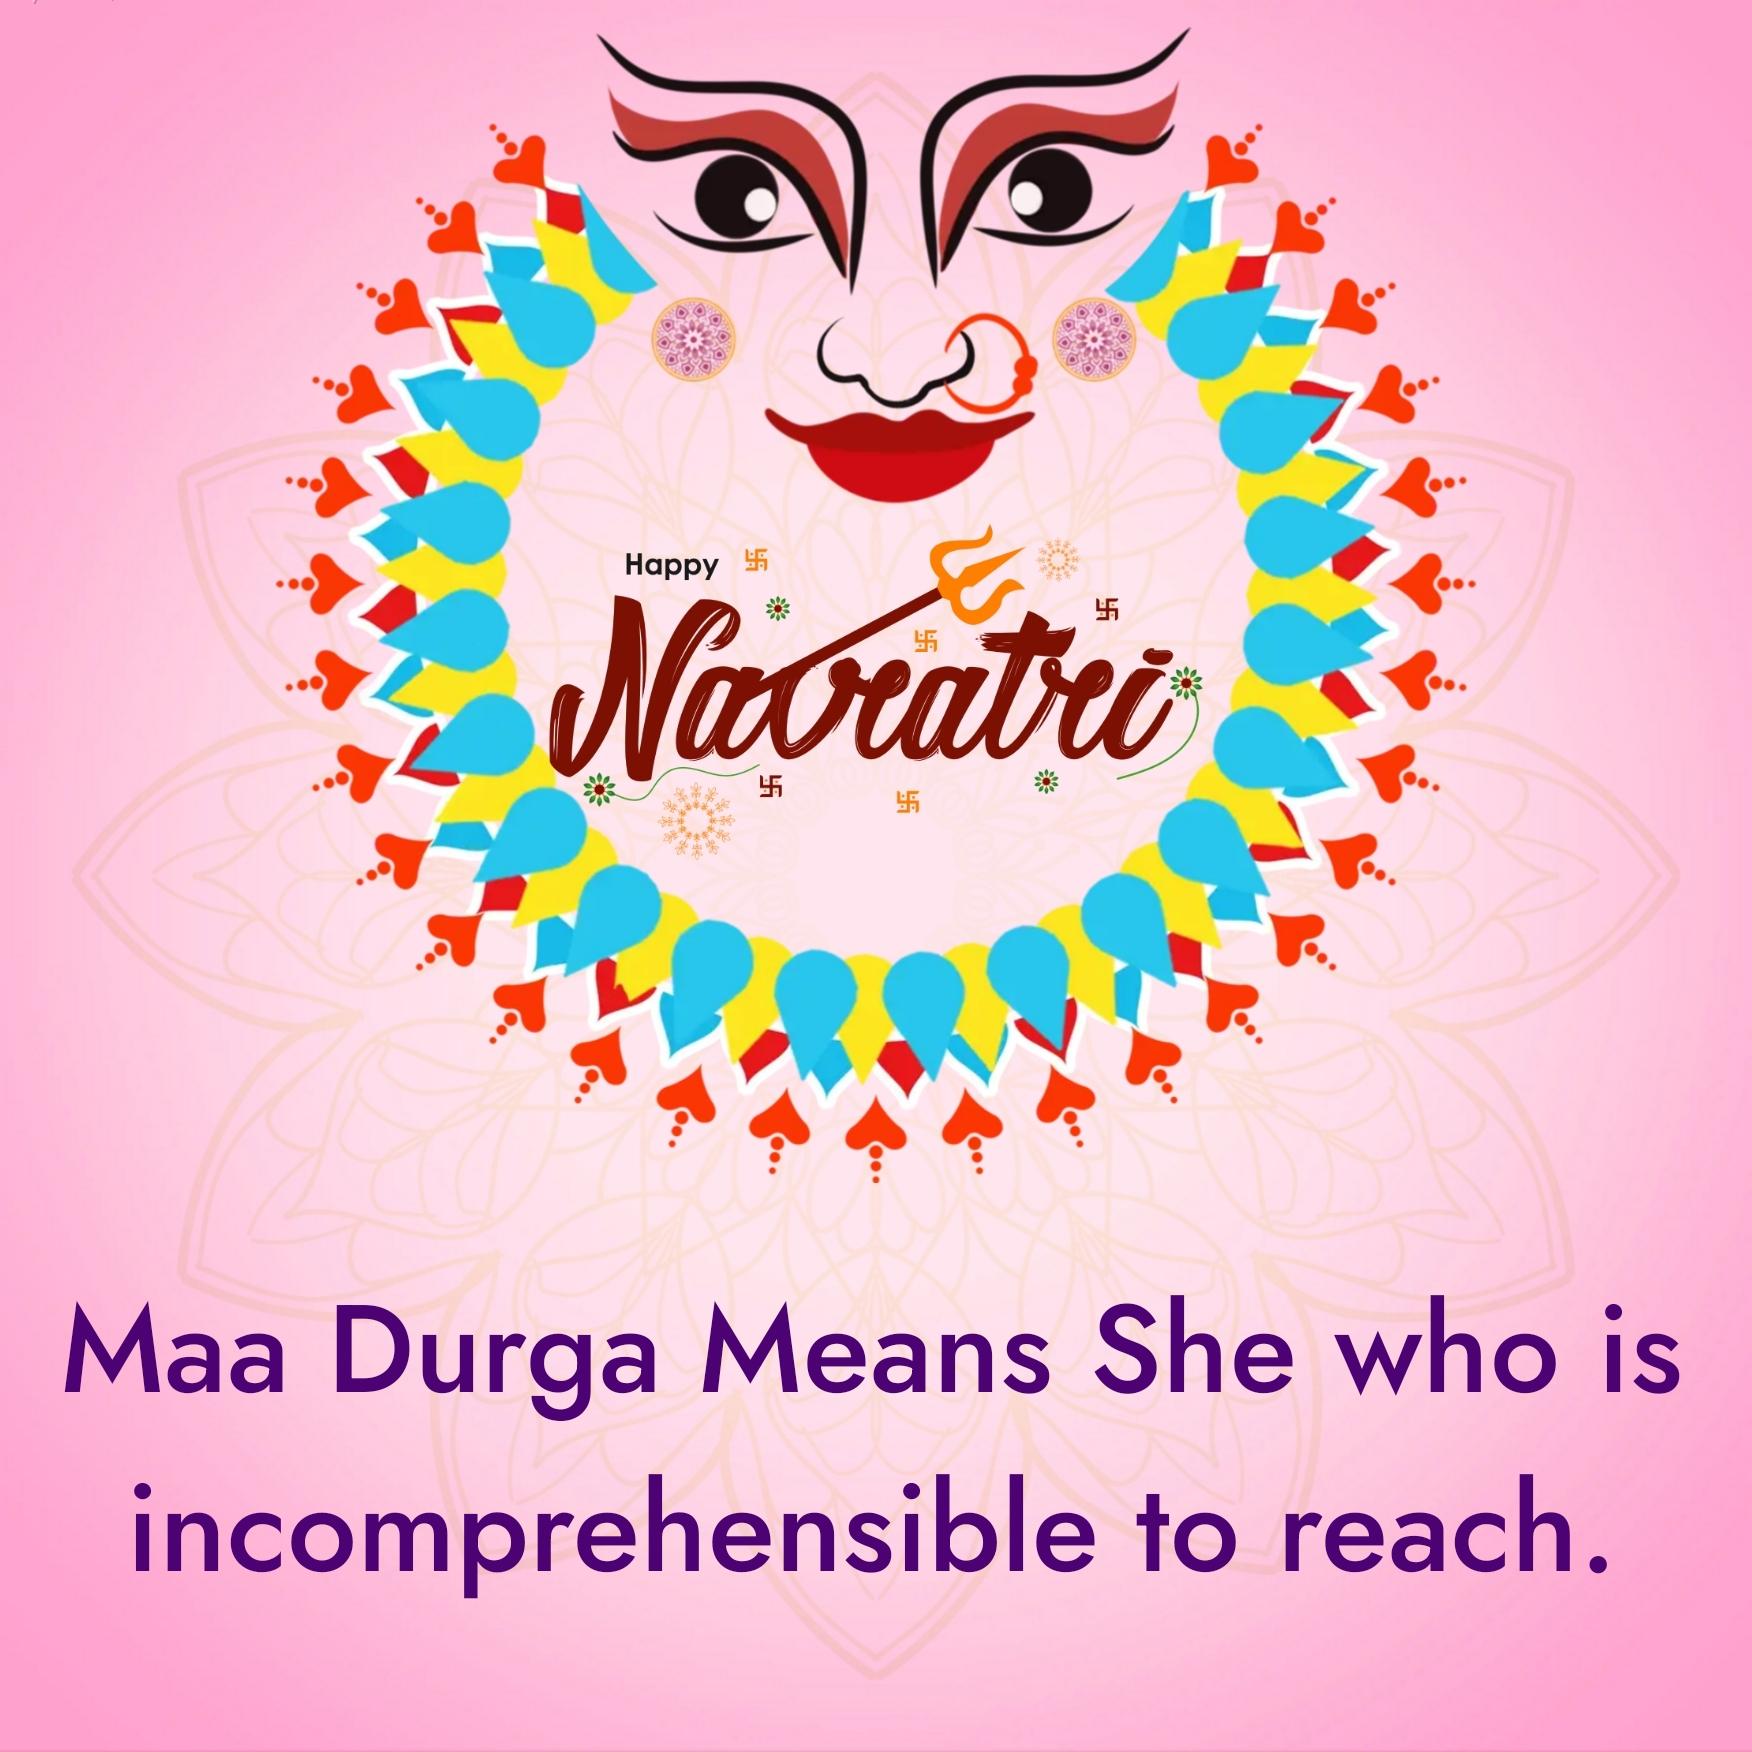 Maa Durga Means She who is incomprehensible to reach